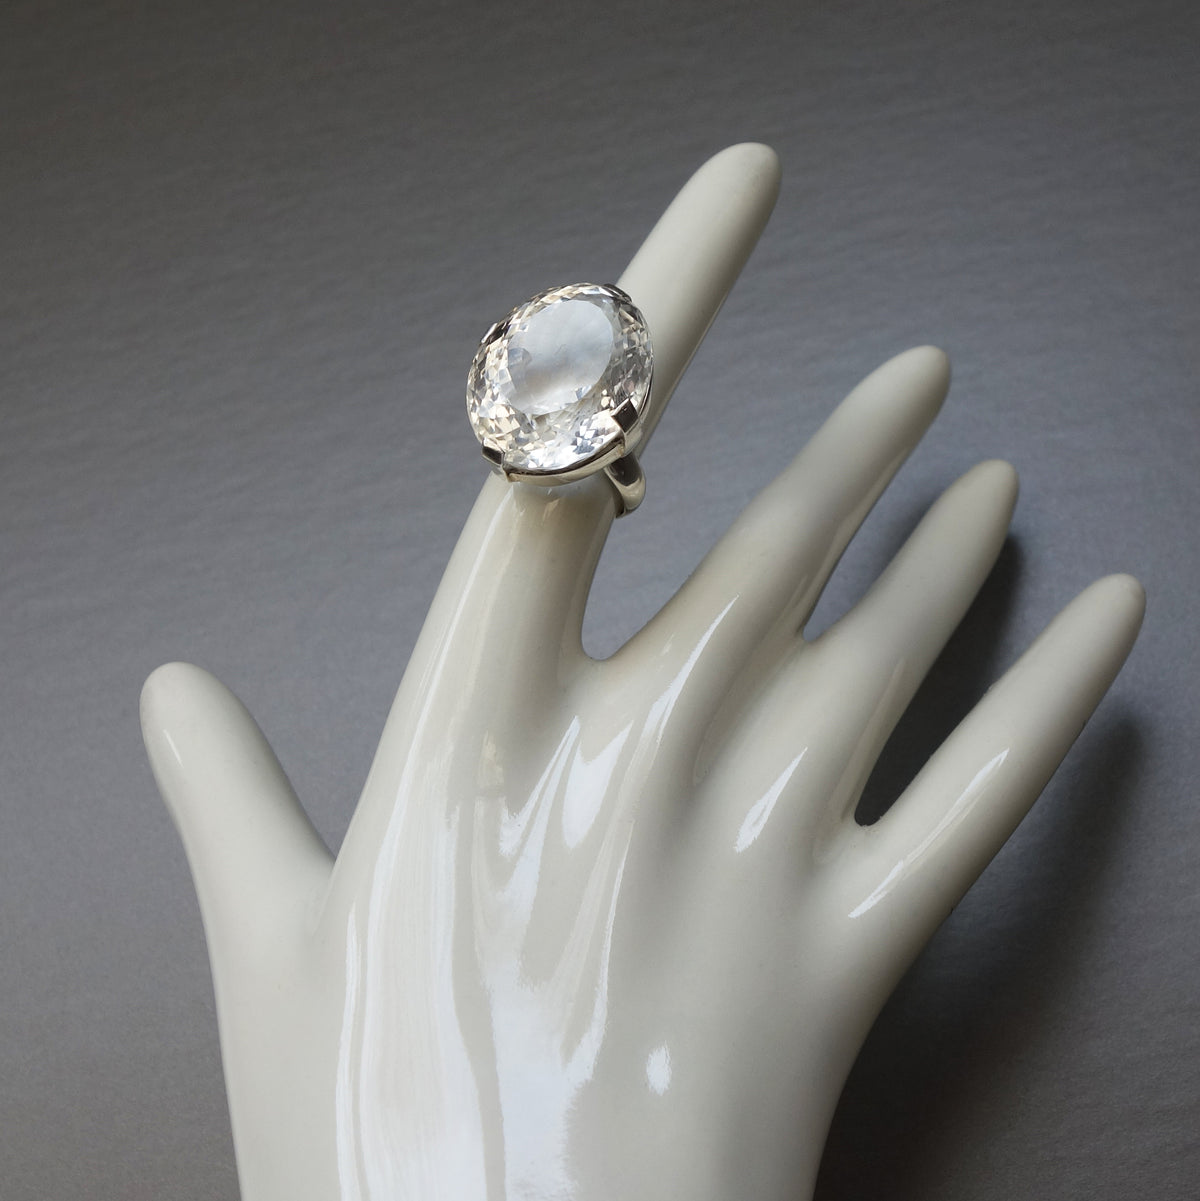 Faceted Bejeweled Clear Quartz ring